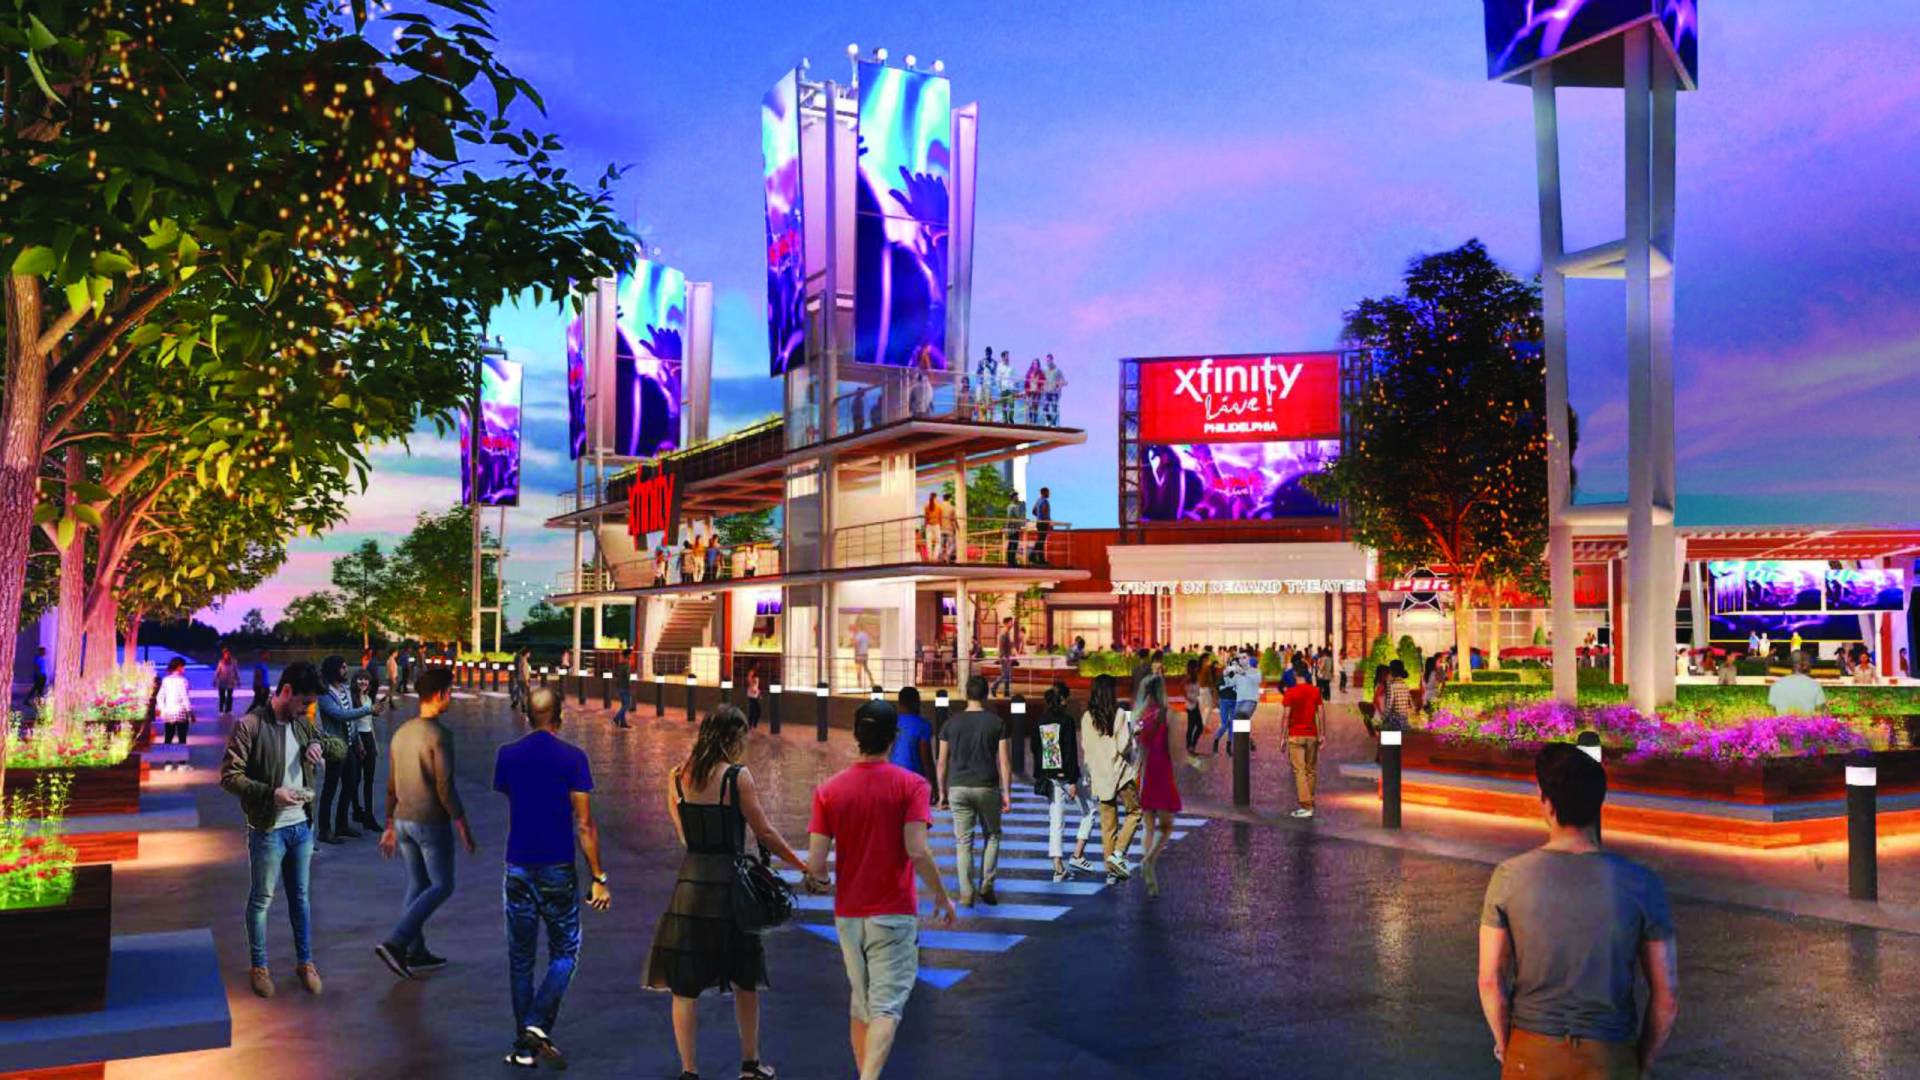 Artistic rendering of the exterior of the reimagined Xfinity Live venue.